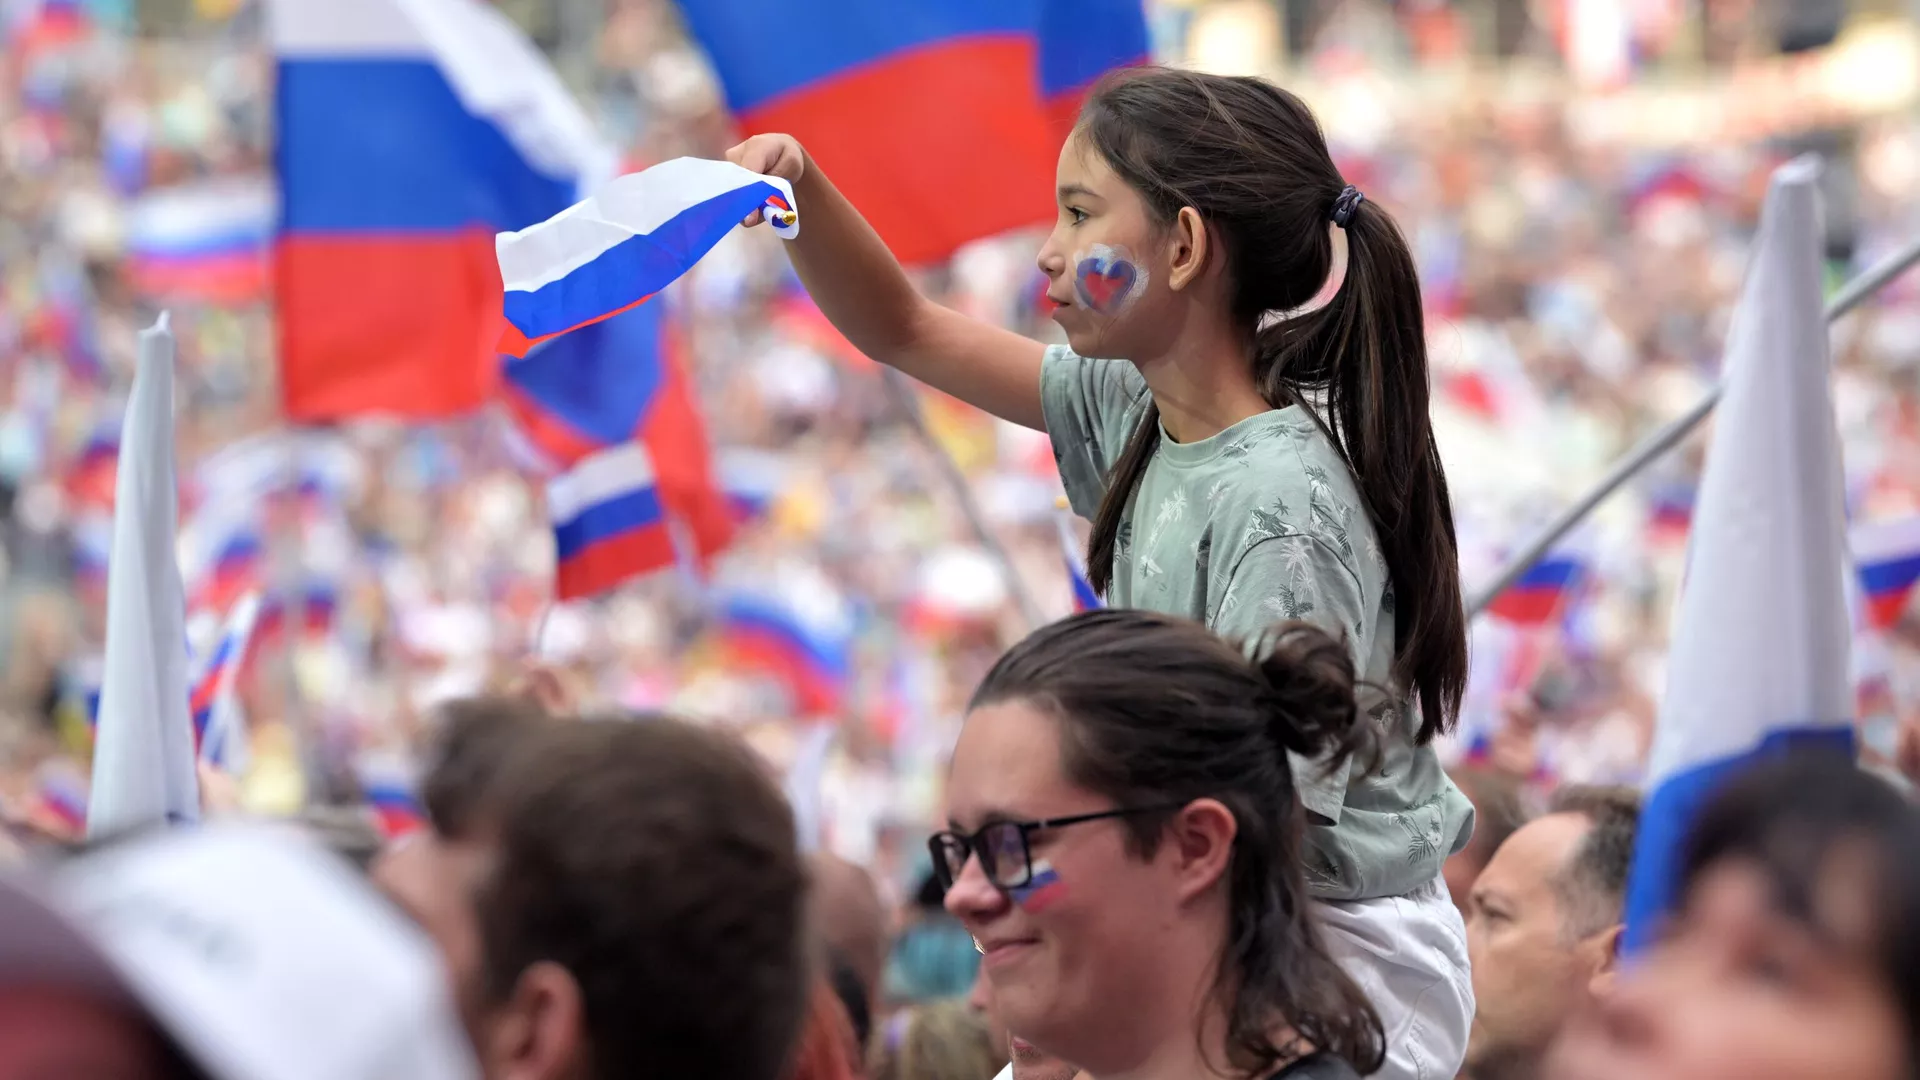 Russia Swept by ‘Unprecedented’ Wave of Patriotism - Poll